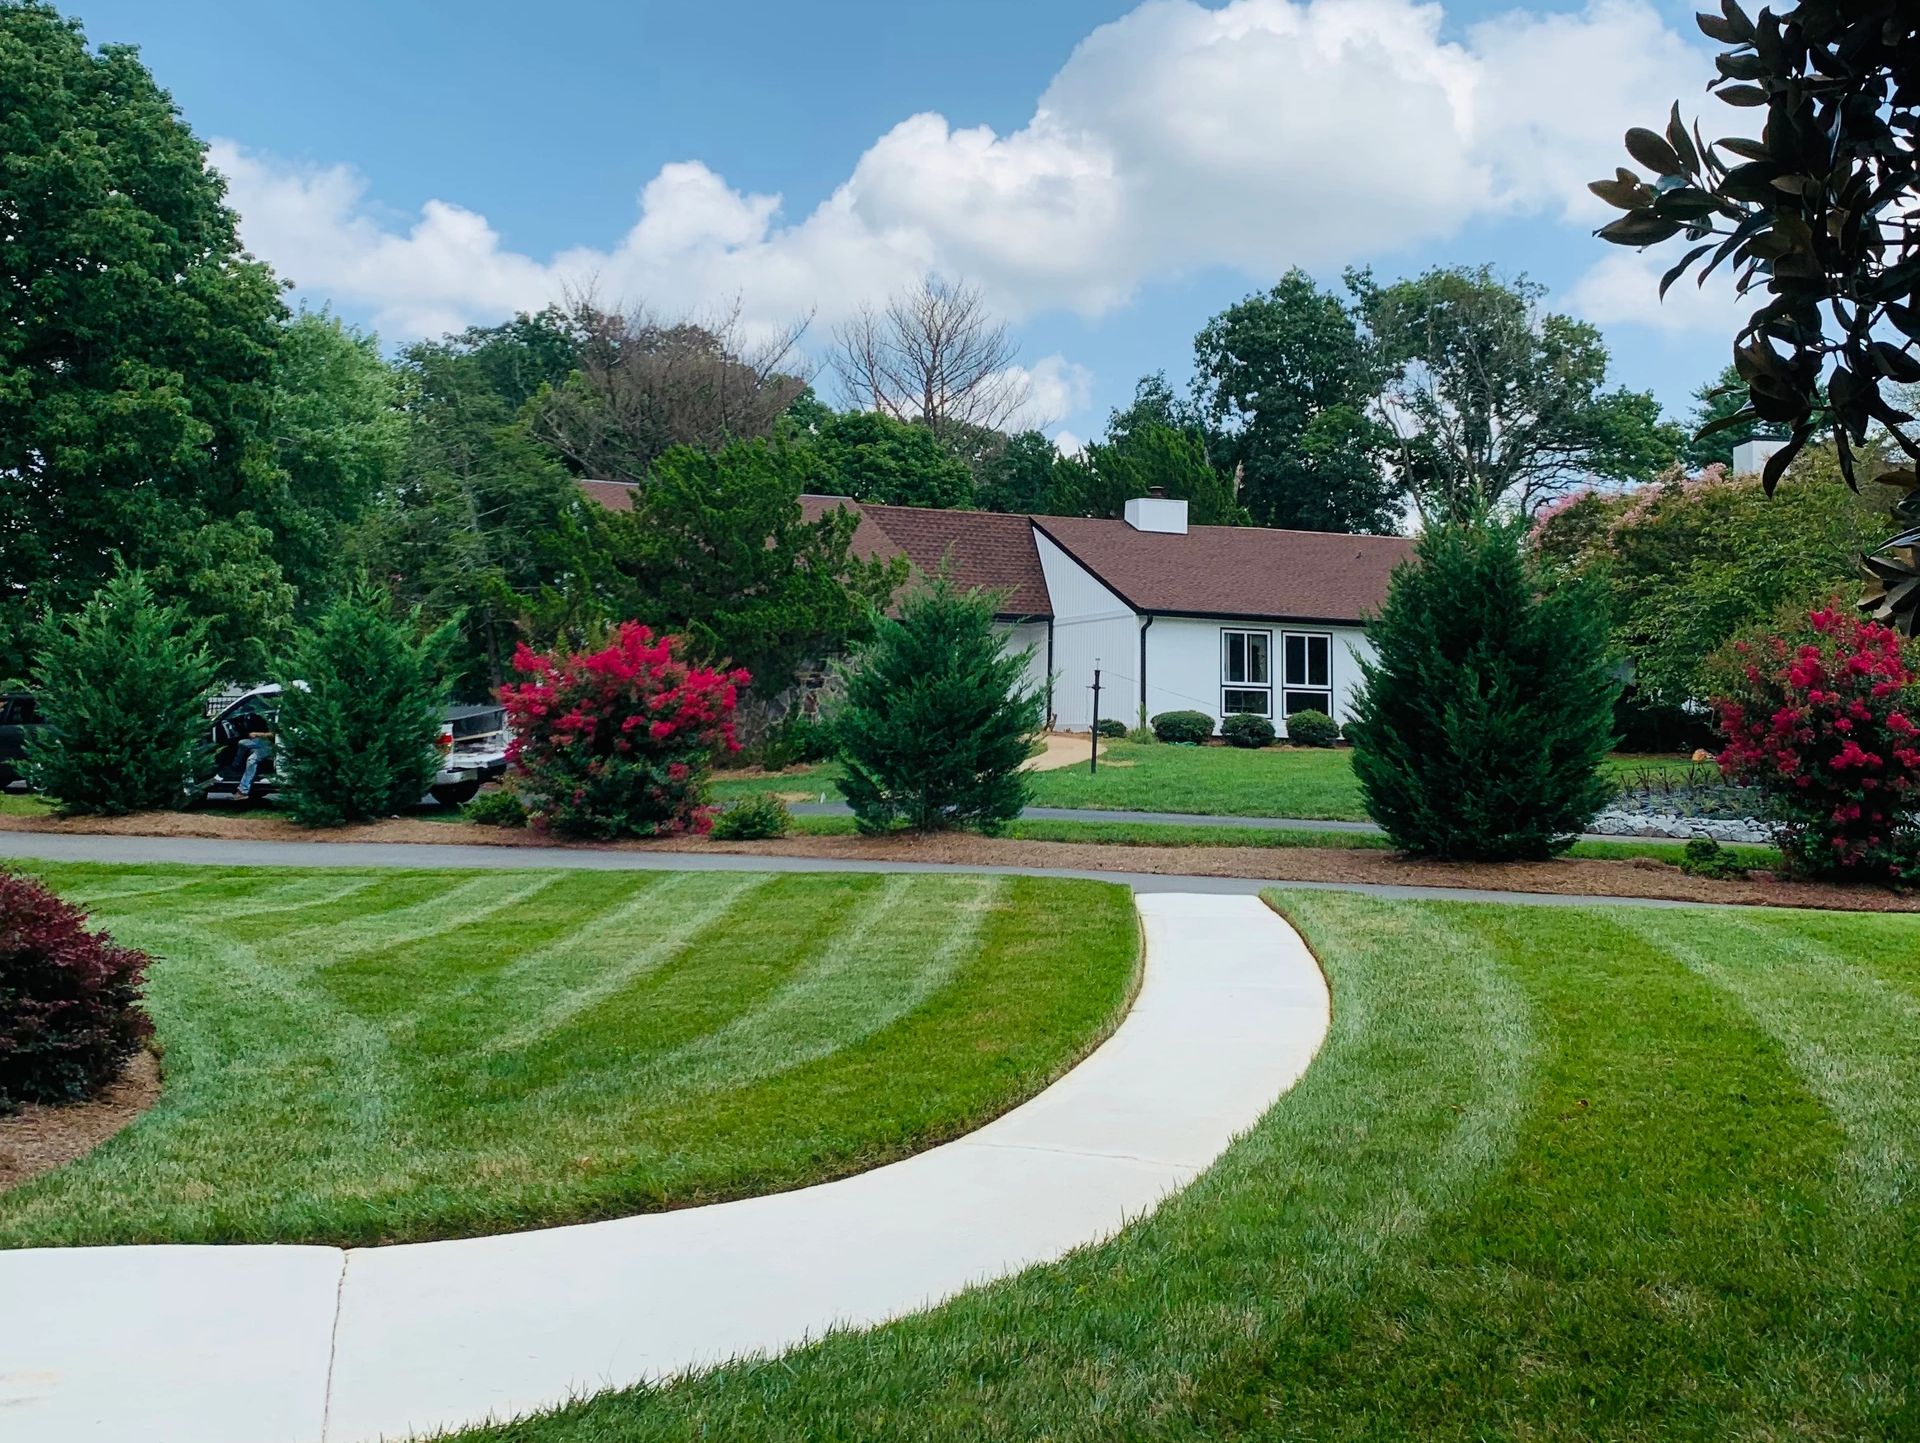 A well-manicured lawn with a curved walkway leading to a white house with black shutters